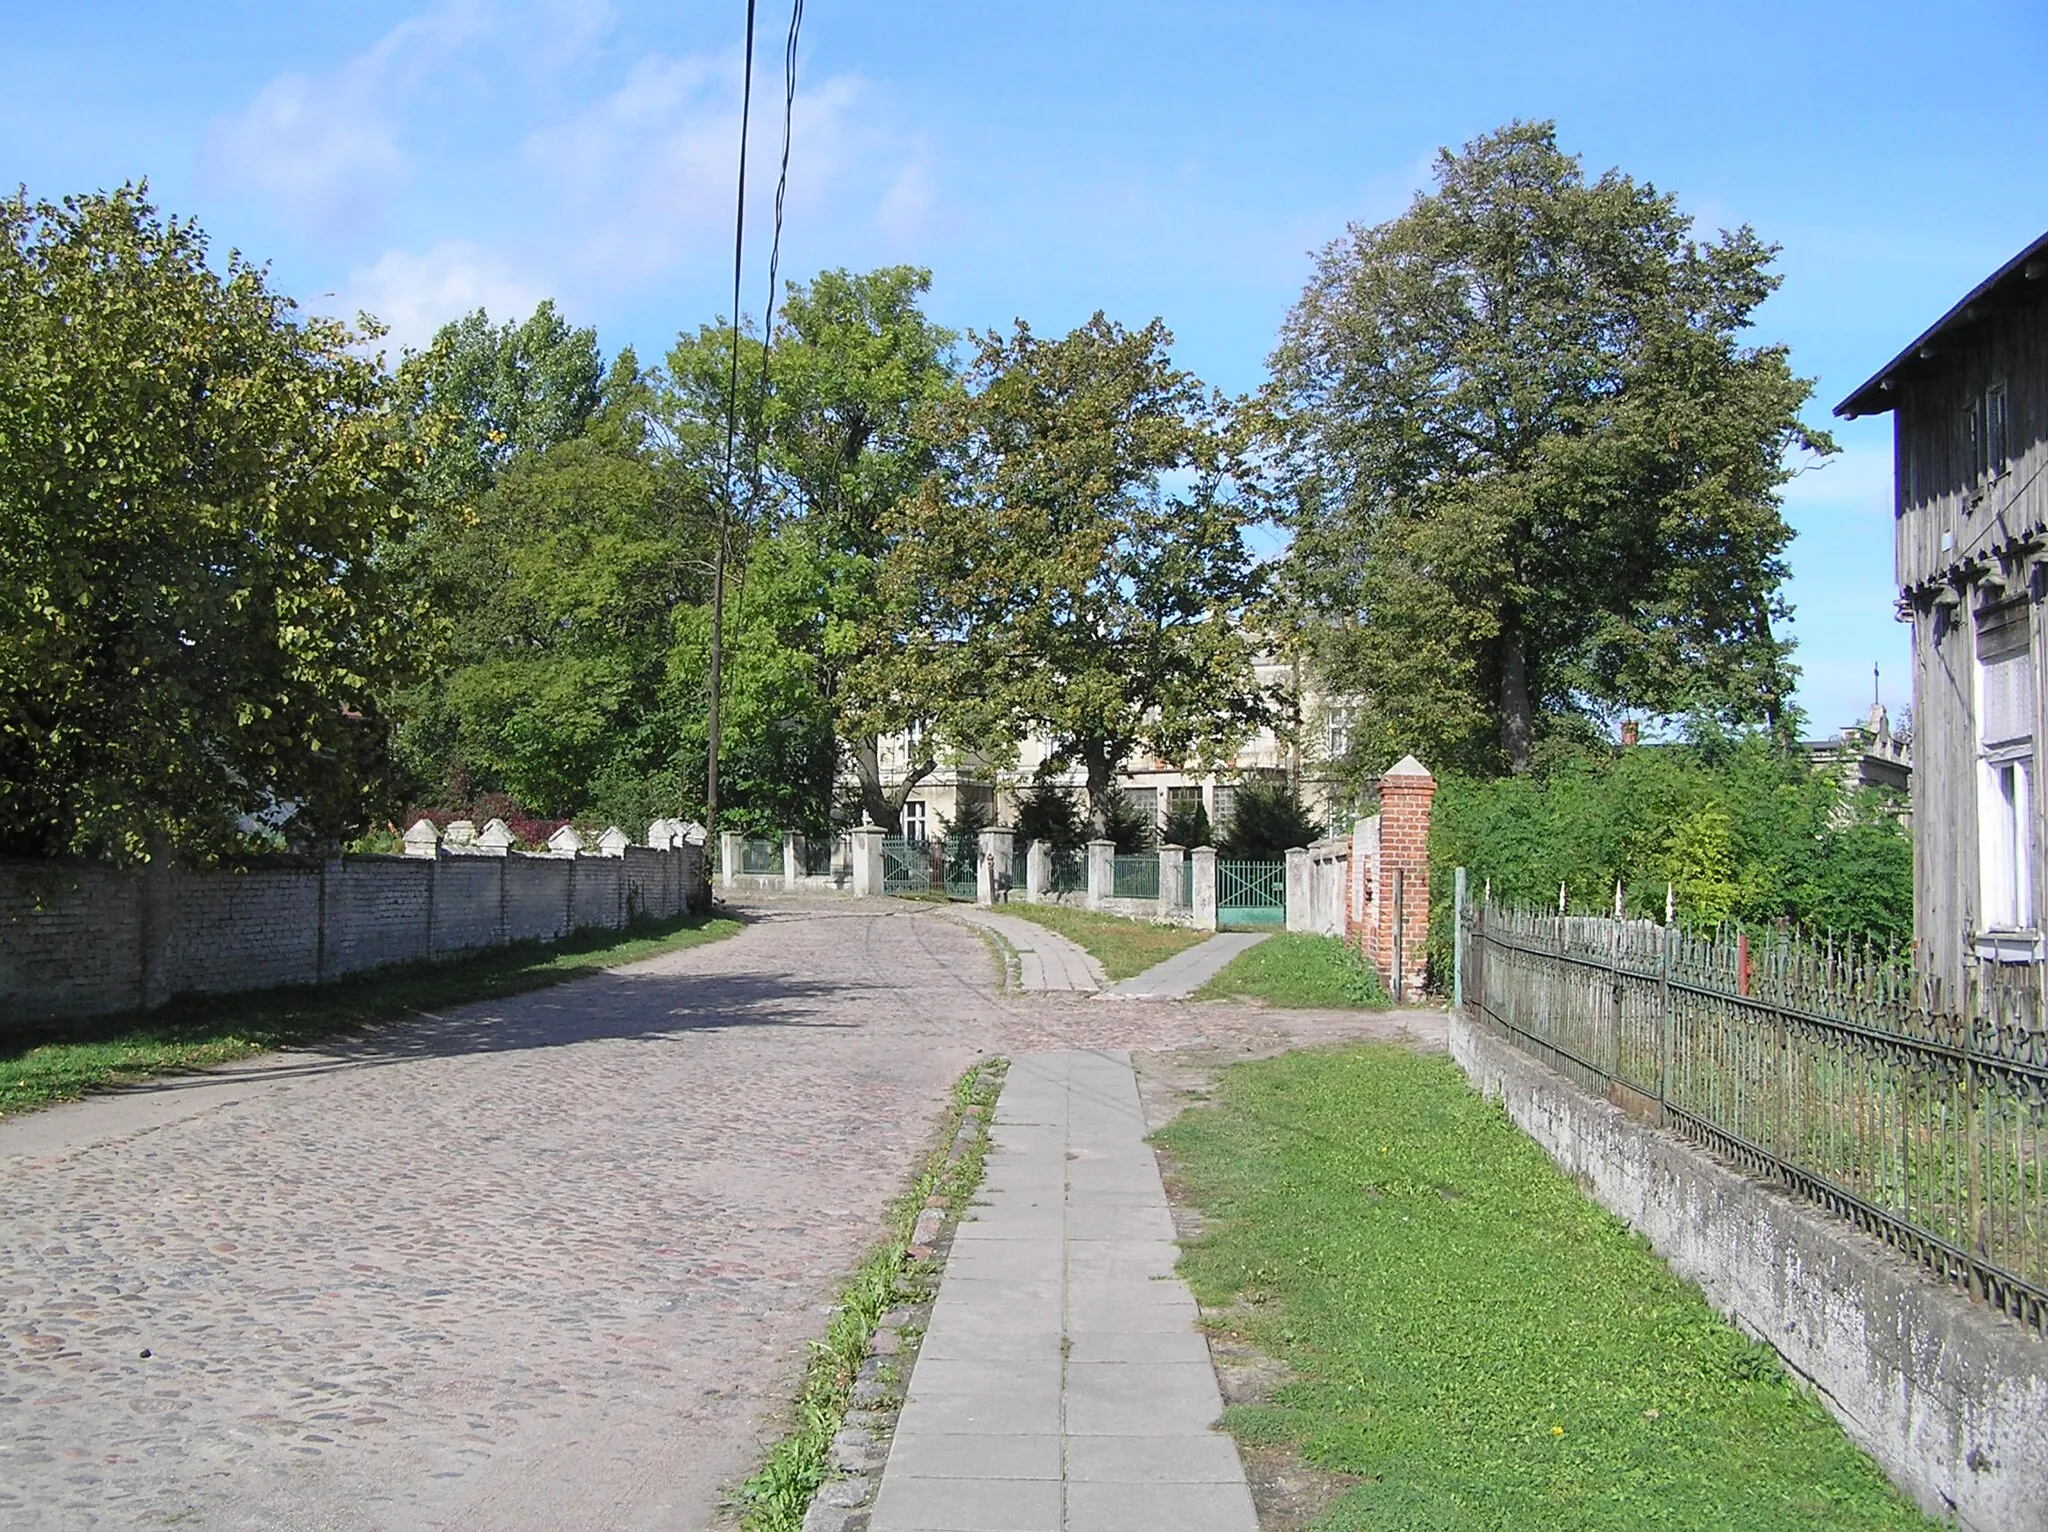 Photo showing: Lulkowo, Toruń county, old cobblestoned road leading to a manor house